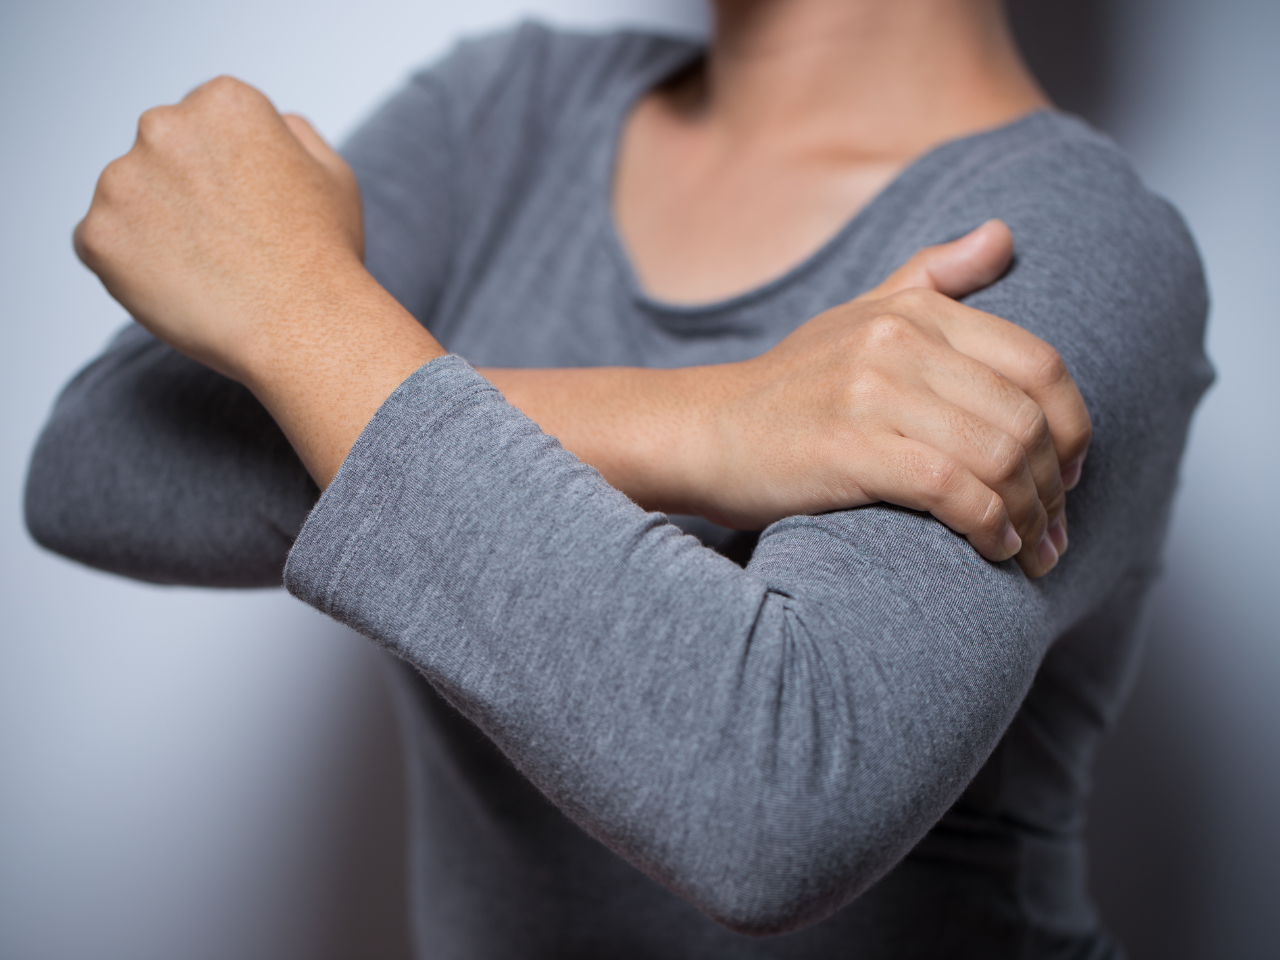 Woman clutching arm due to arm pain, a symptom of heart attack.